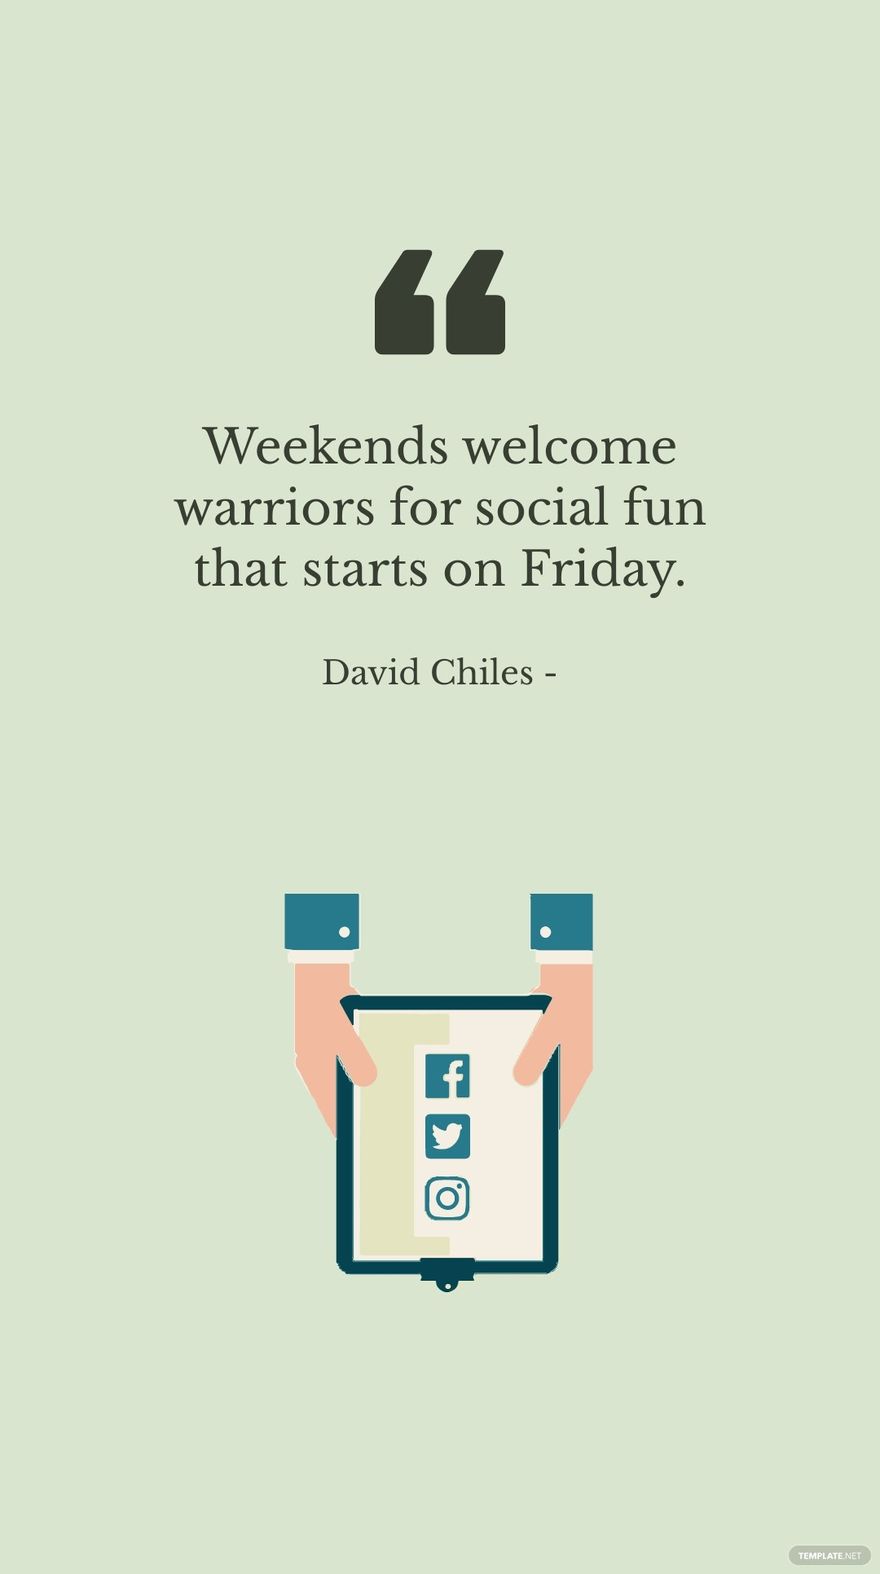 David Chiles - Weekends welcome warriors for social fun that starts on Friday. in JPG